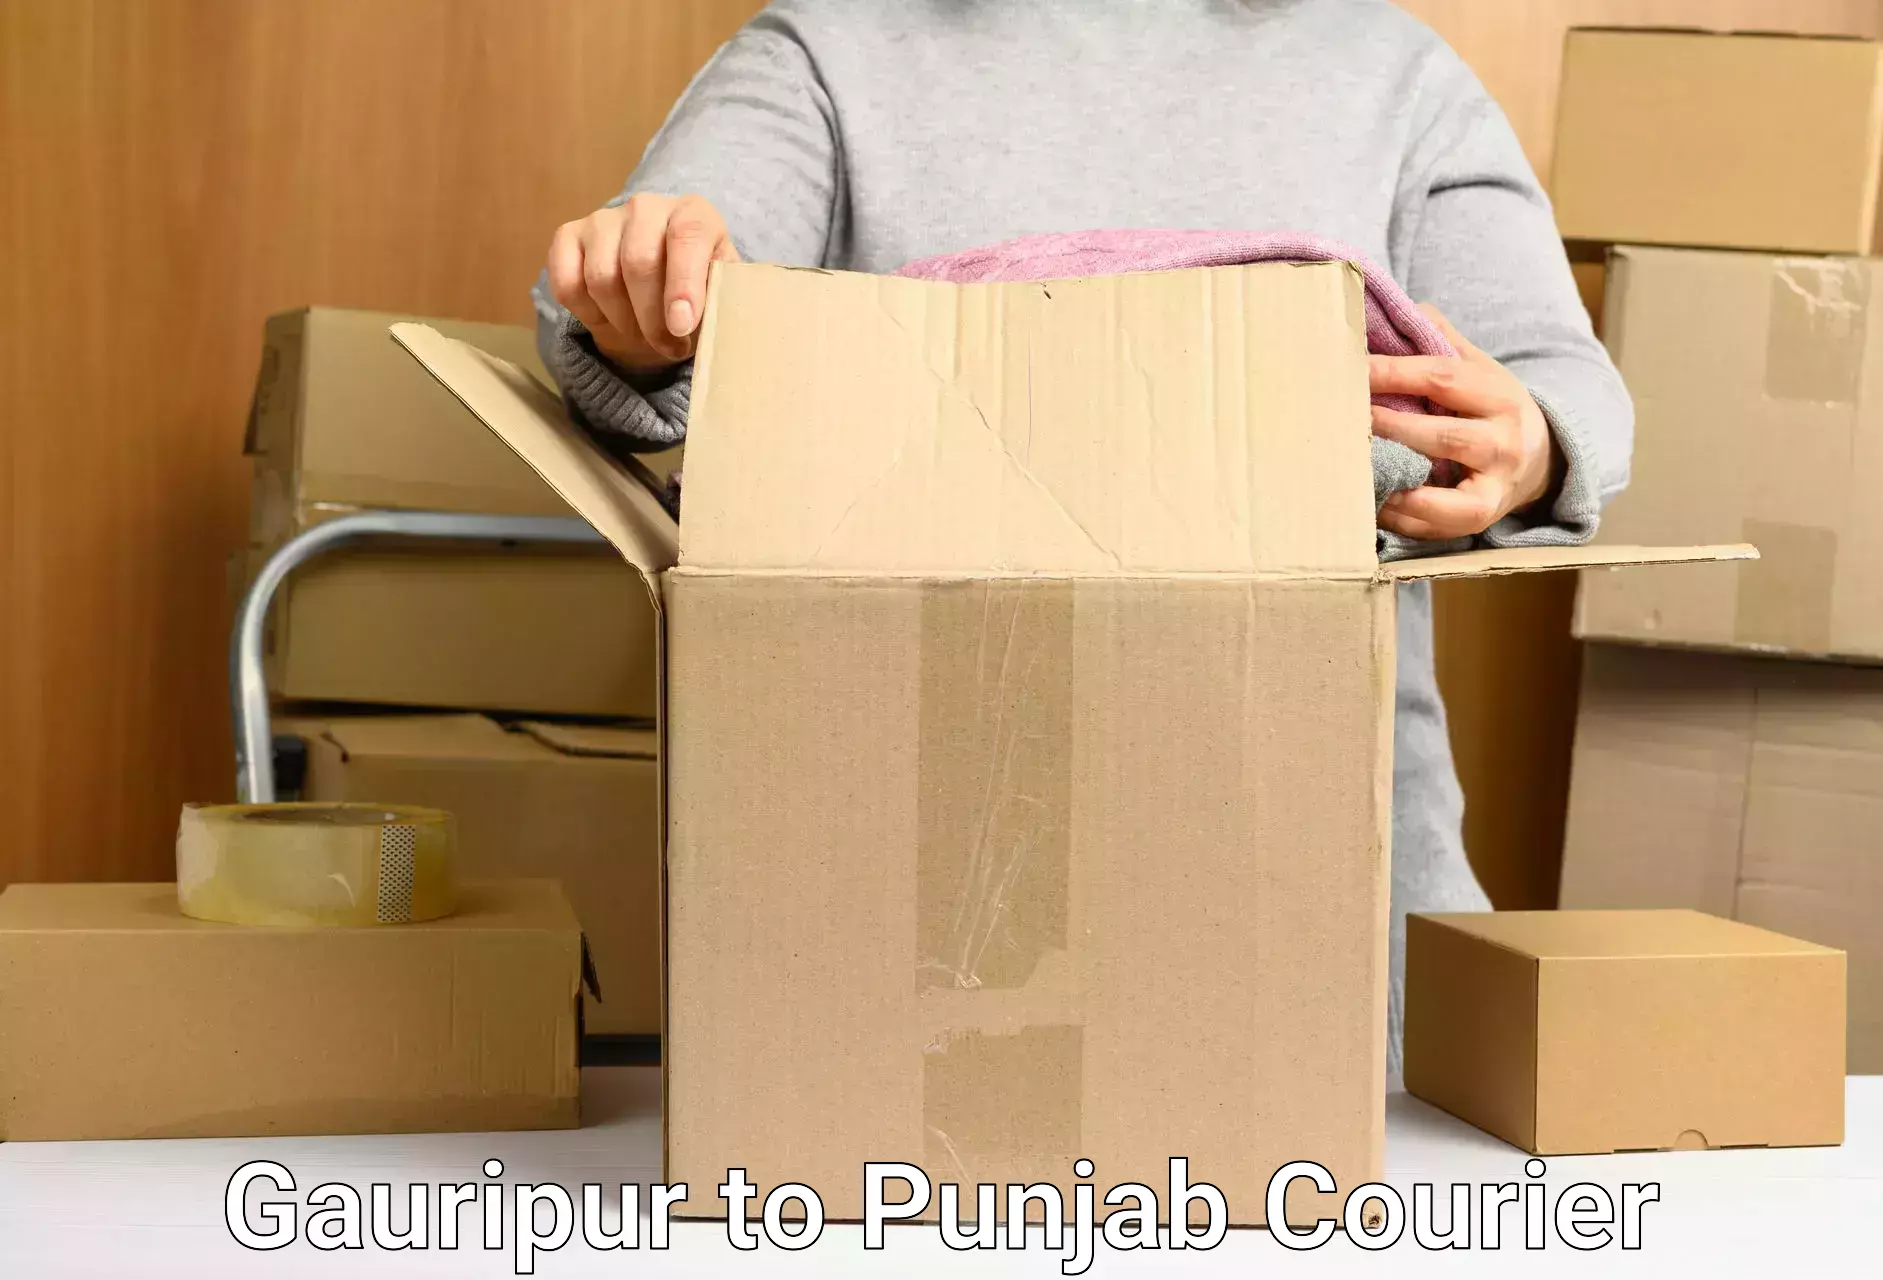 Same-day delivery solutions Gauripur to Patiala